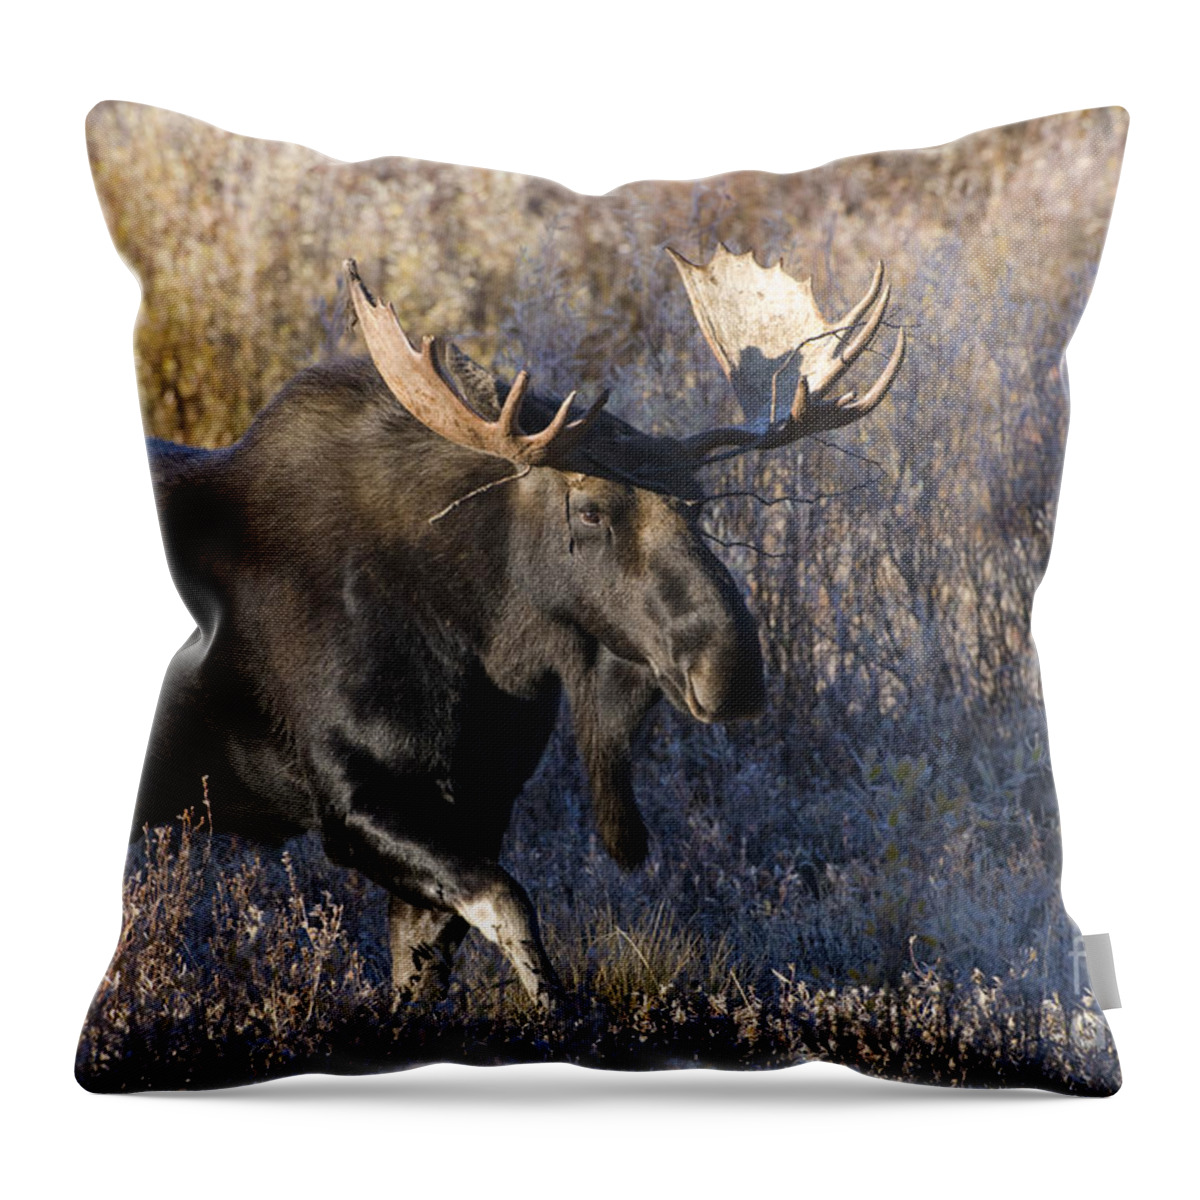 Grand Teton National Park Throw Pillow featuring the photograph Strolling Through The Willows by Sandra Bronstein